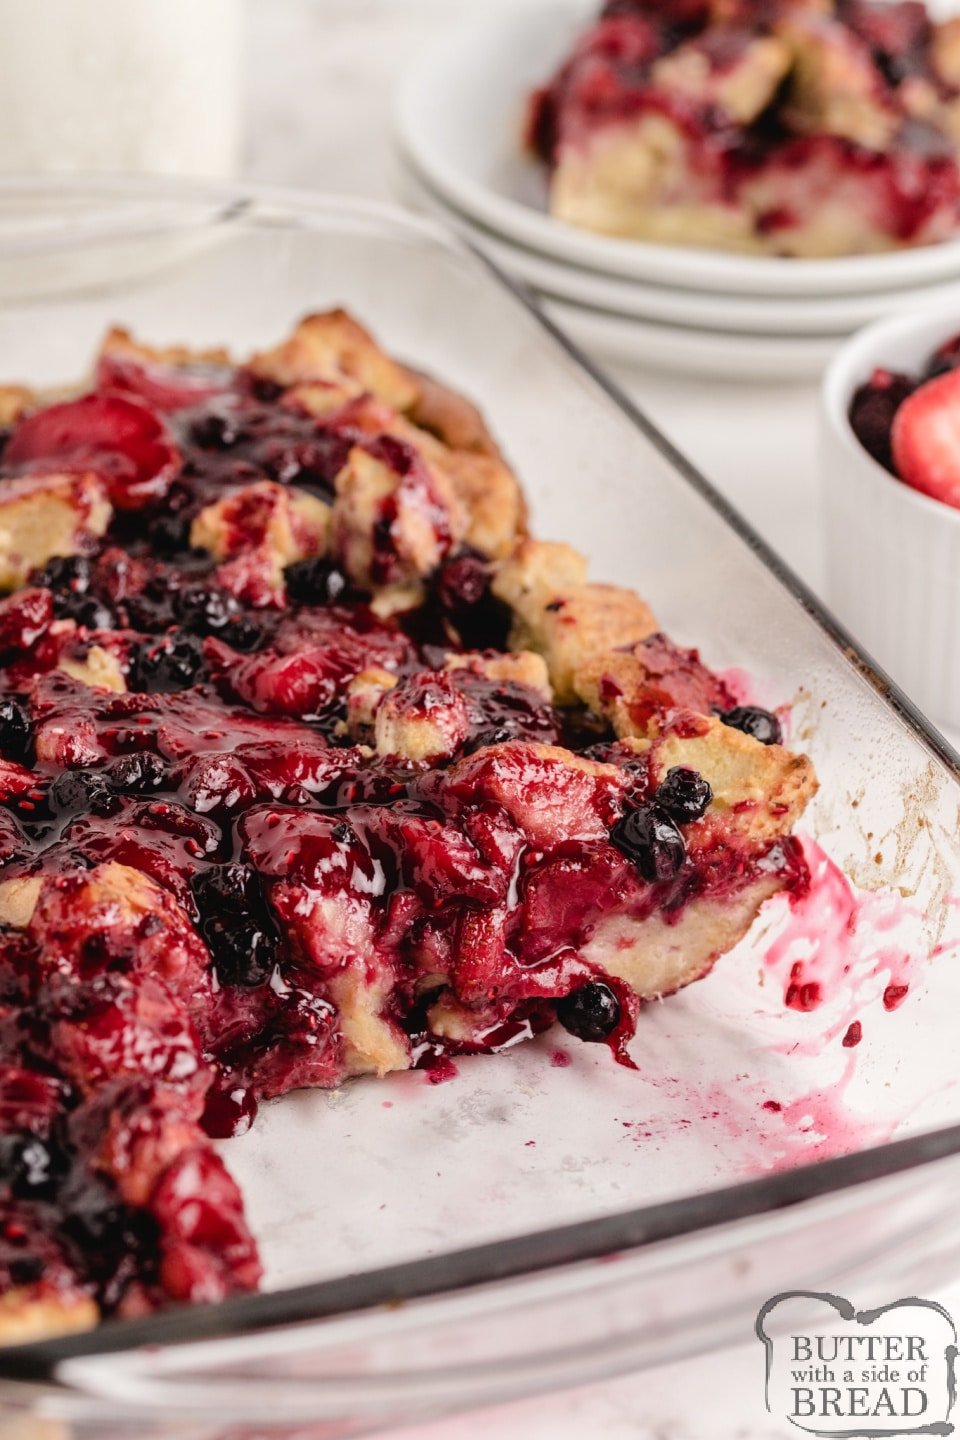 French toast casserole dish with mixed berries